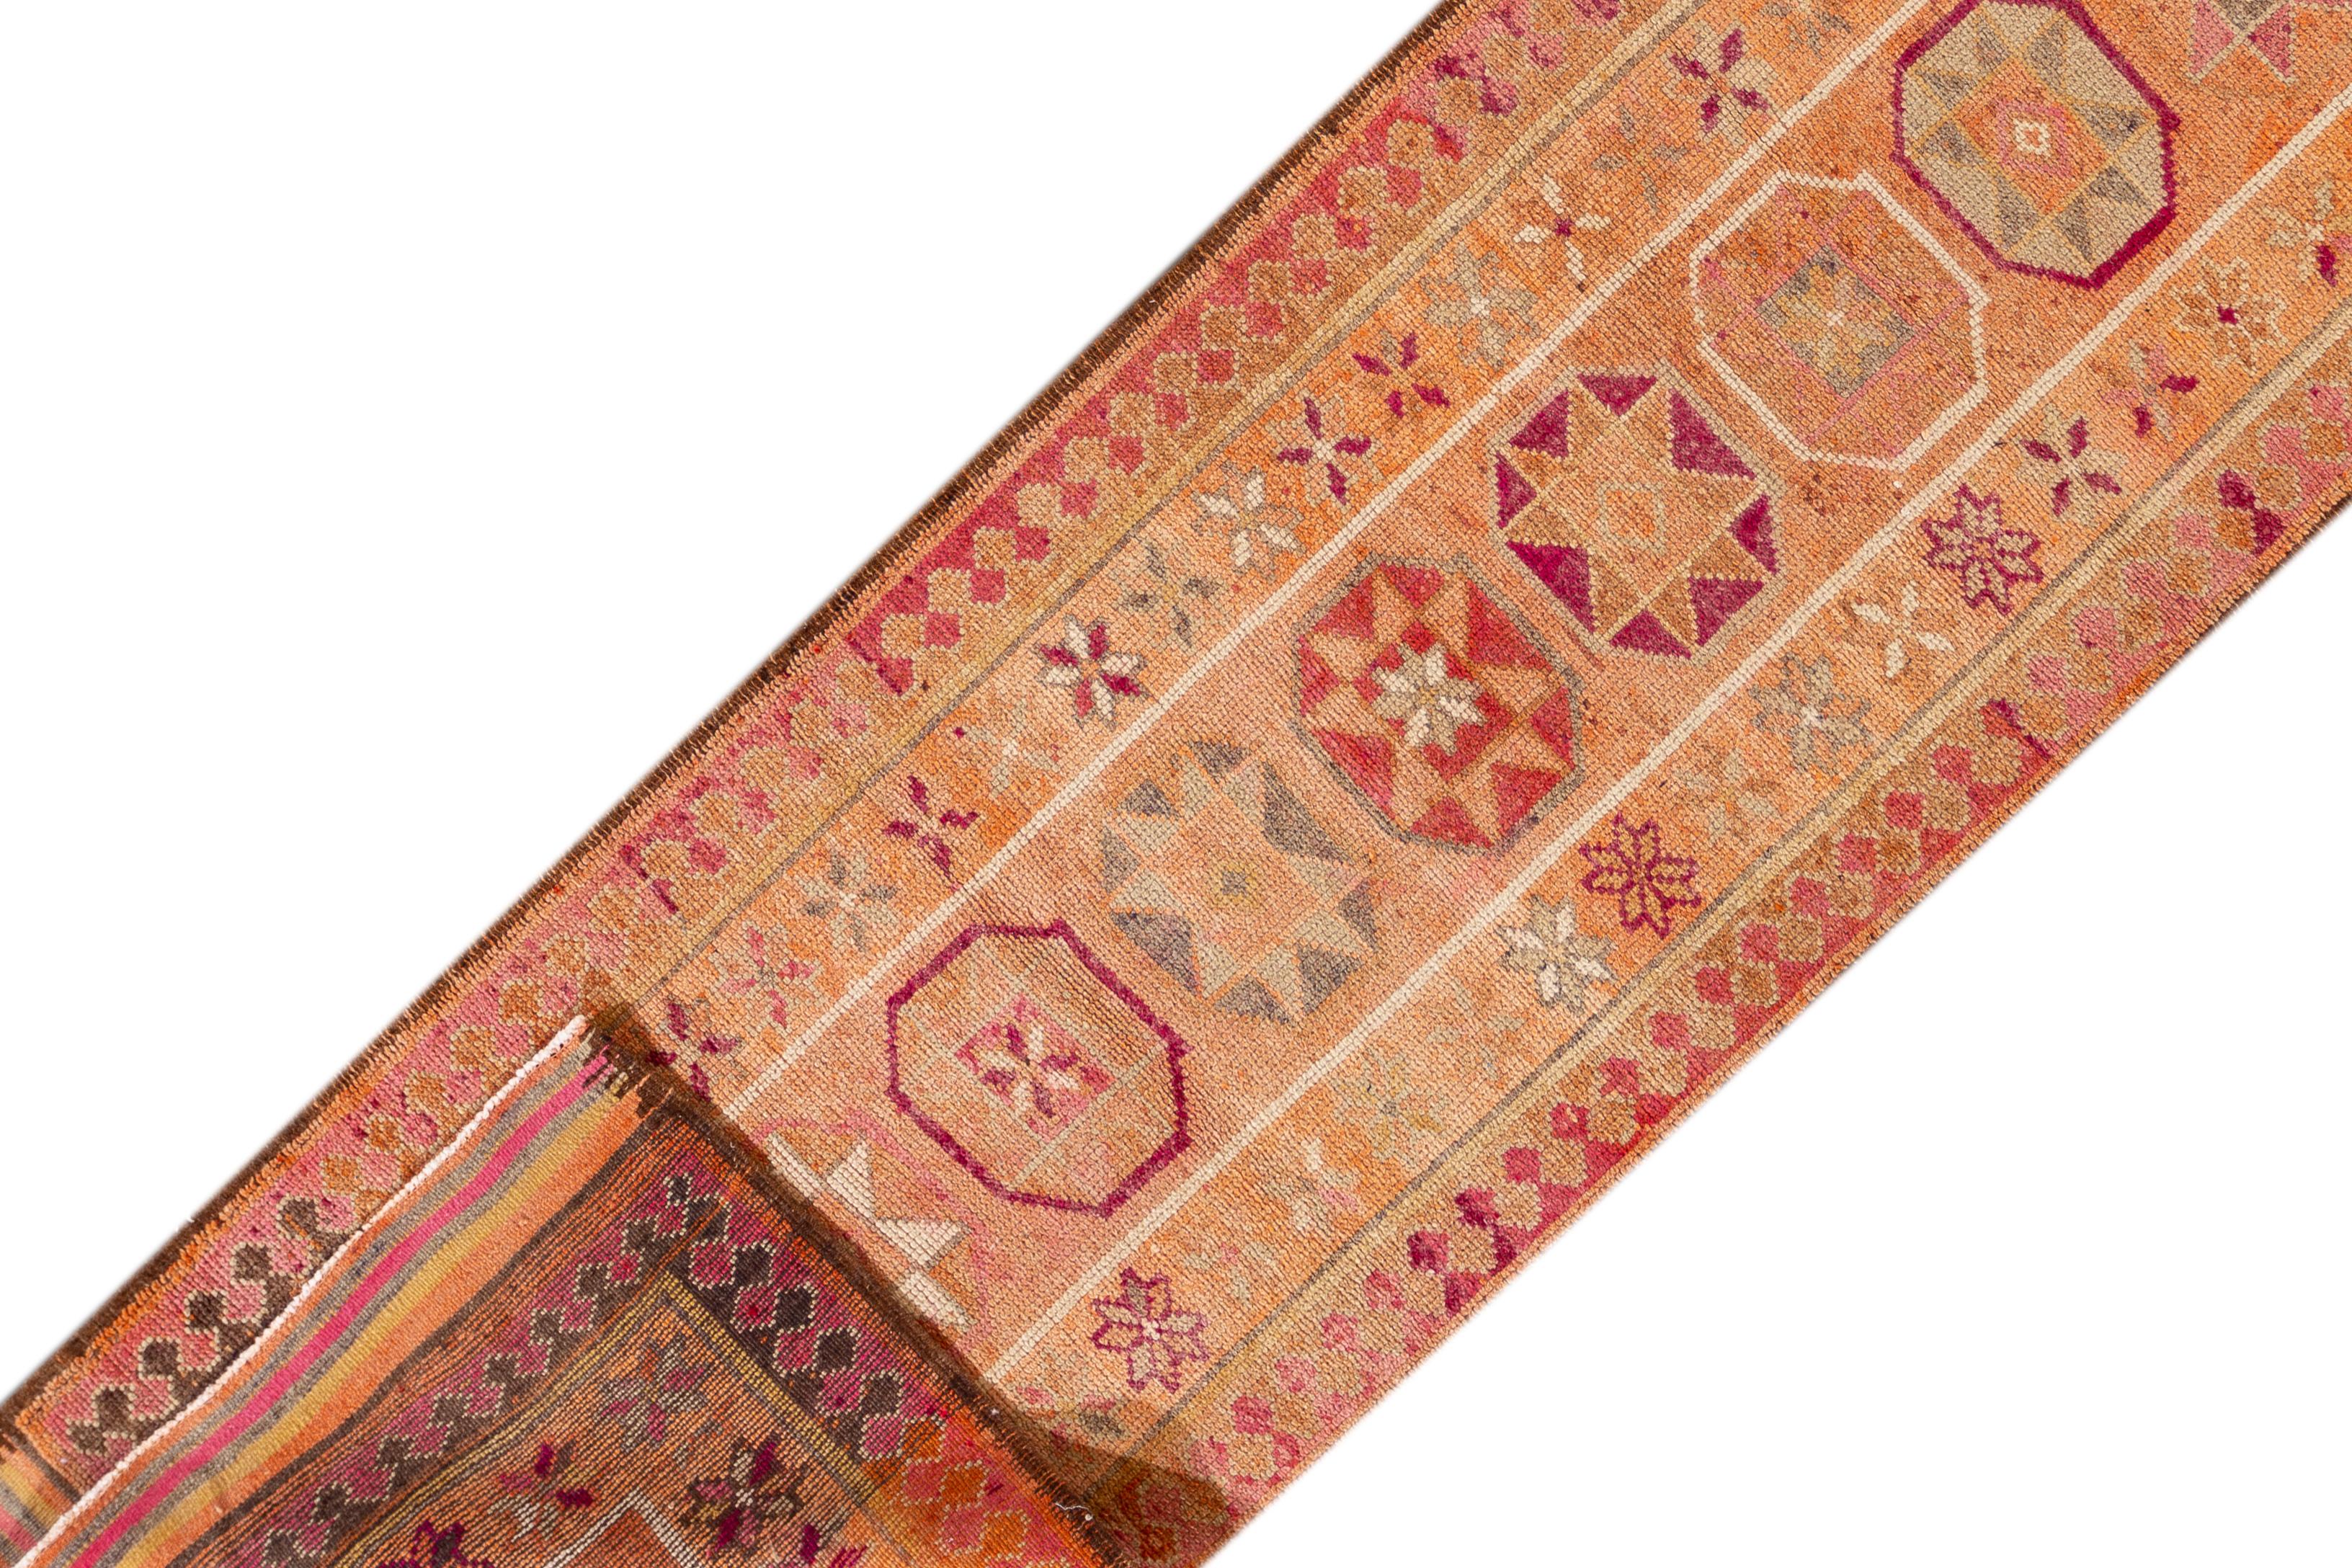 A 20th century vintage Turkish Anatolian runner rug with an all-over orange geometric motif. This rug measures at 3'2